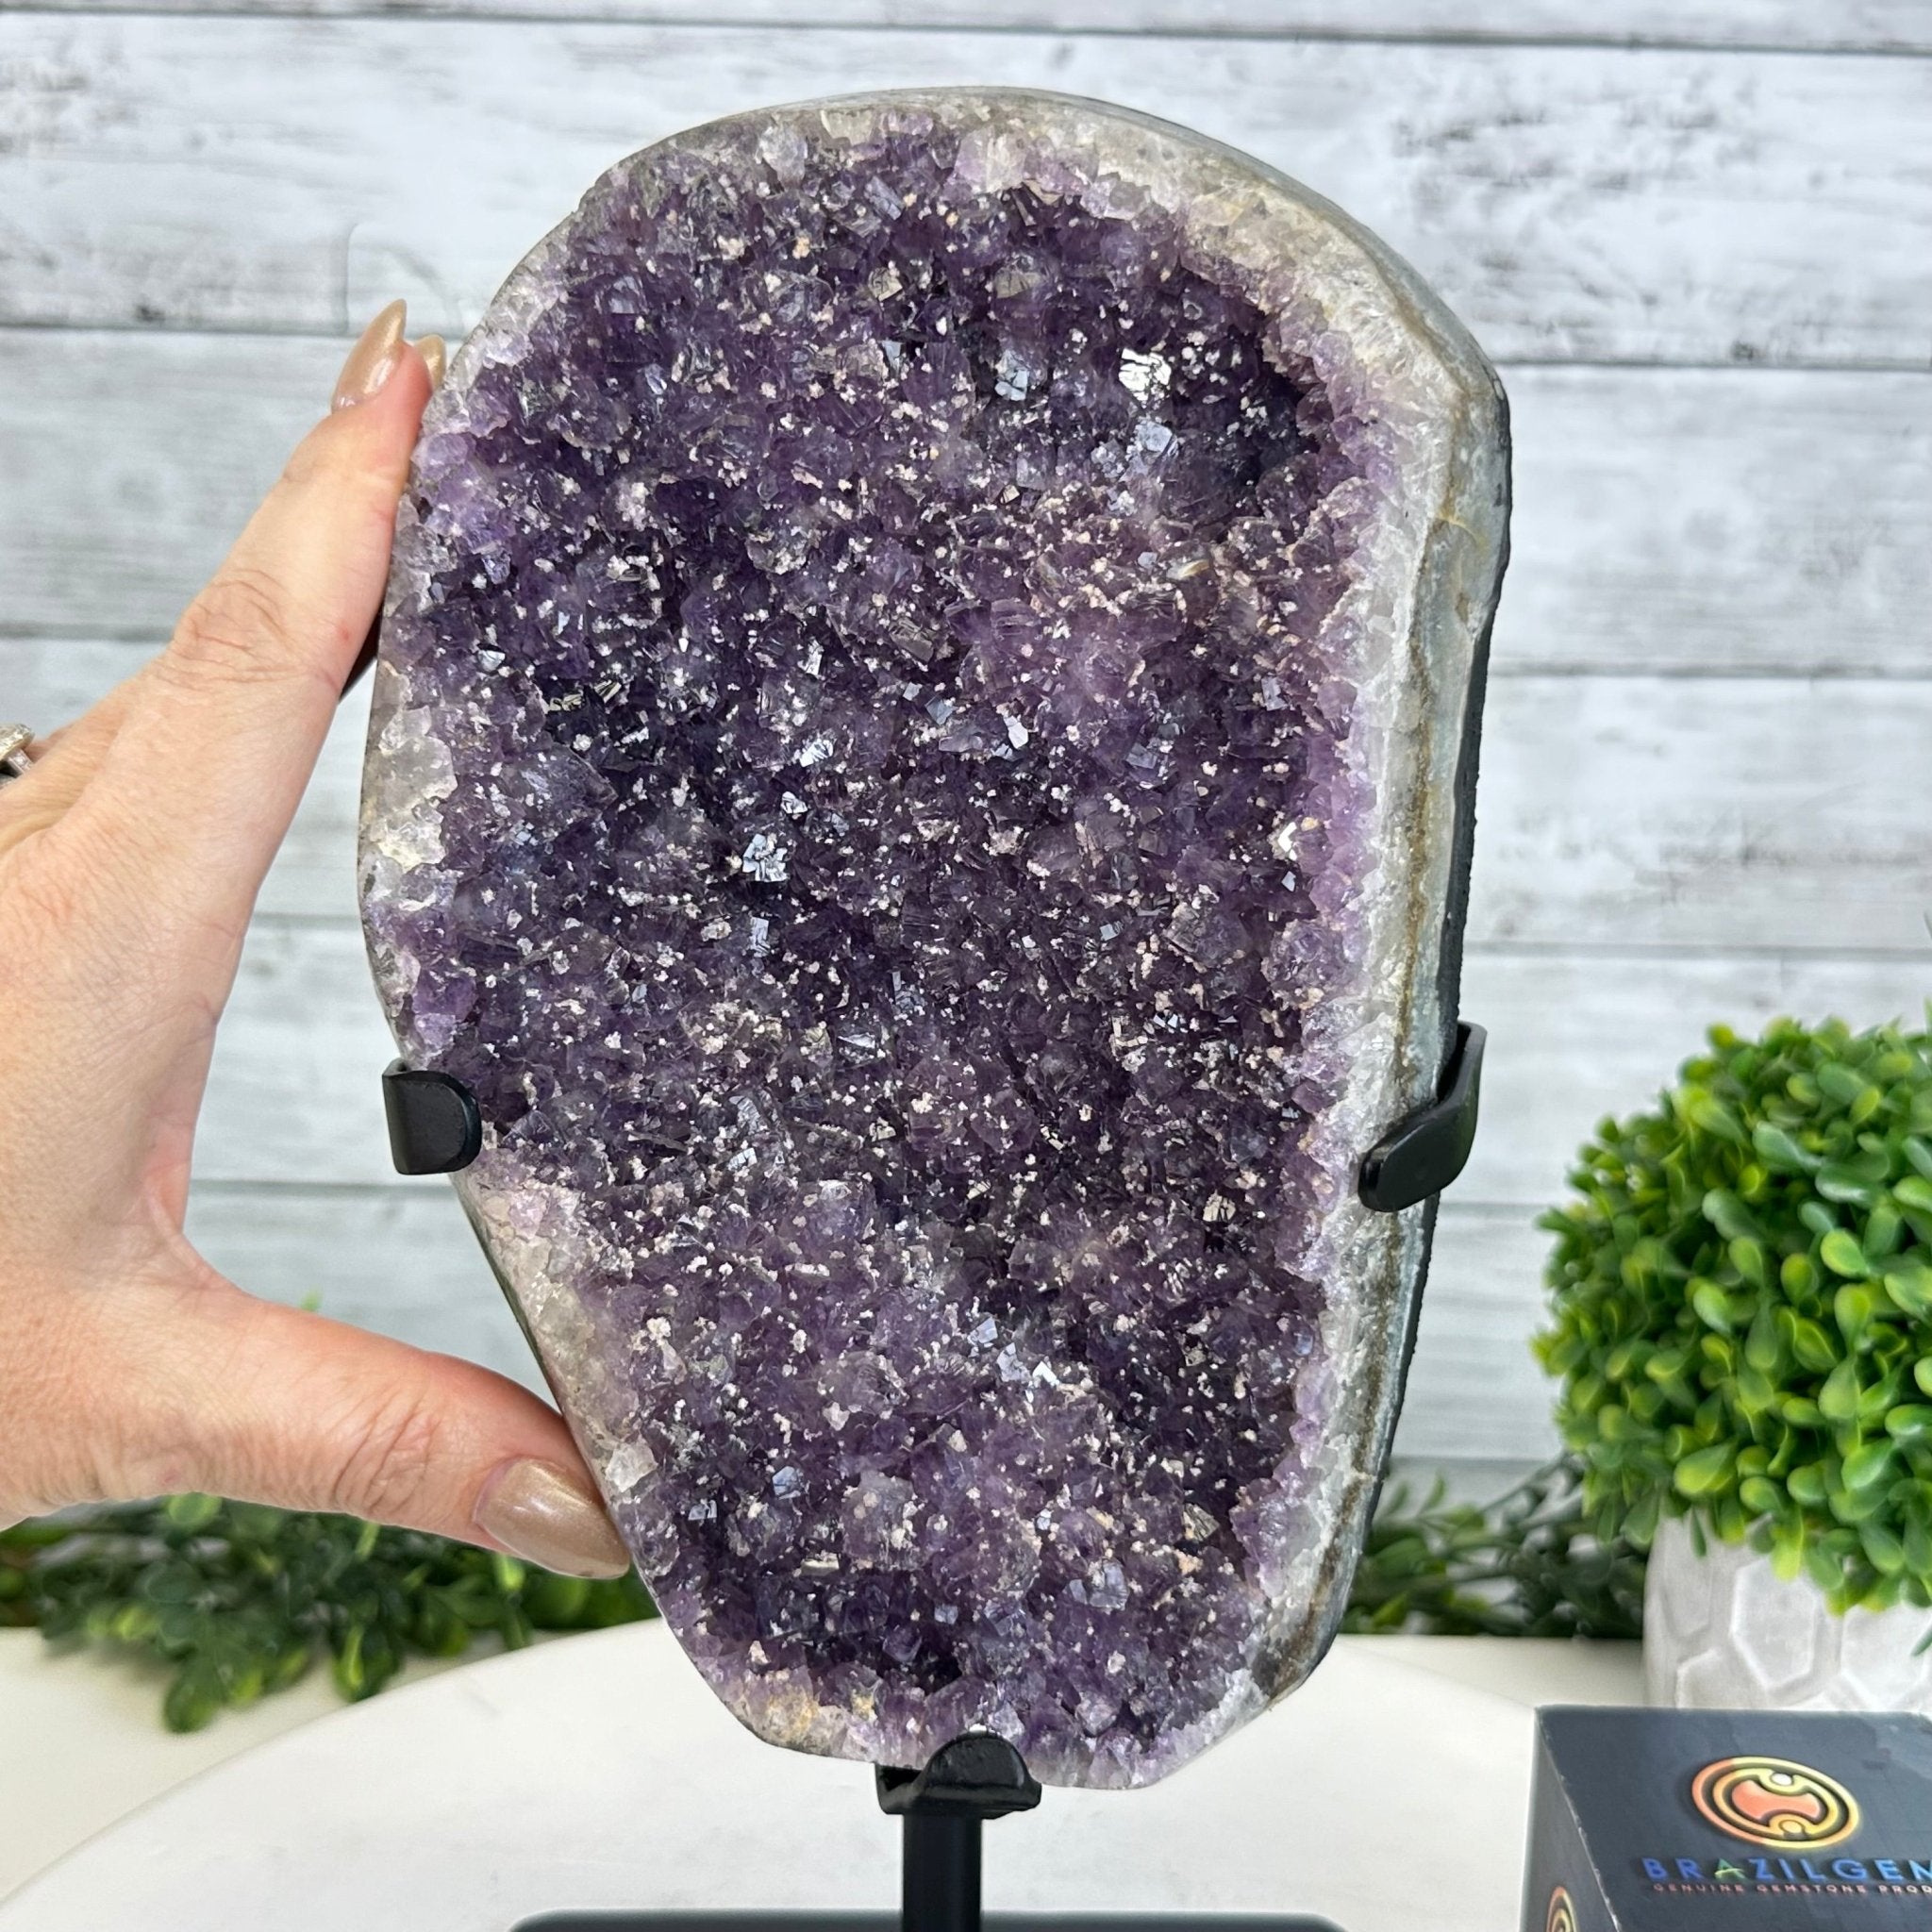 Quality Amethyst Cluster on a Metal Base, 10.9 lbs & 12.25" Tall #5491 - 0047 - Brazil GemsBrazil GemsQuality Amethyst Cluster on a Metal Base, 10.9 lbs & 12.25" Tall #5491 - 0047Clusters on Fixed Bases5491 - 0047